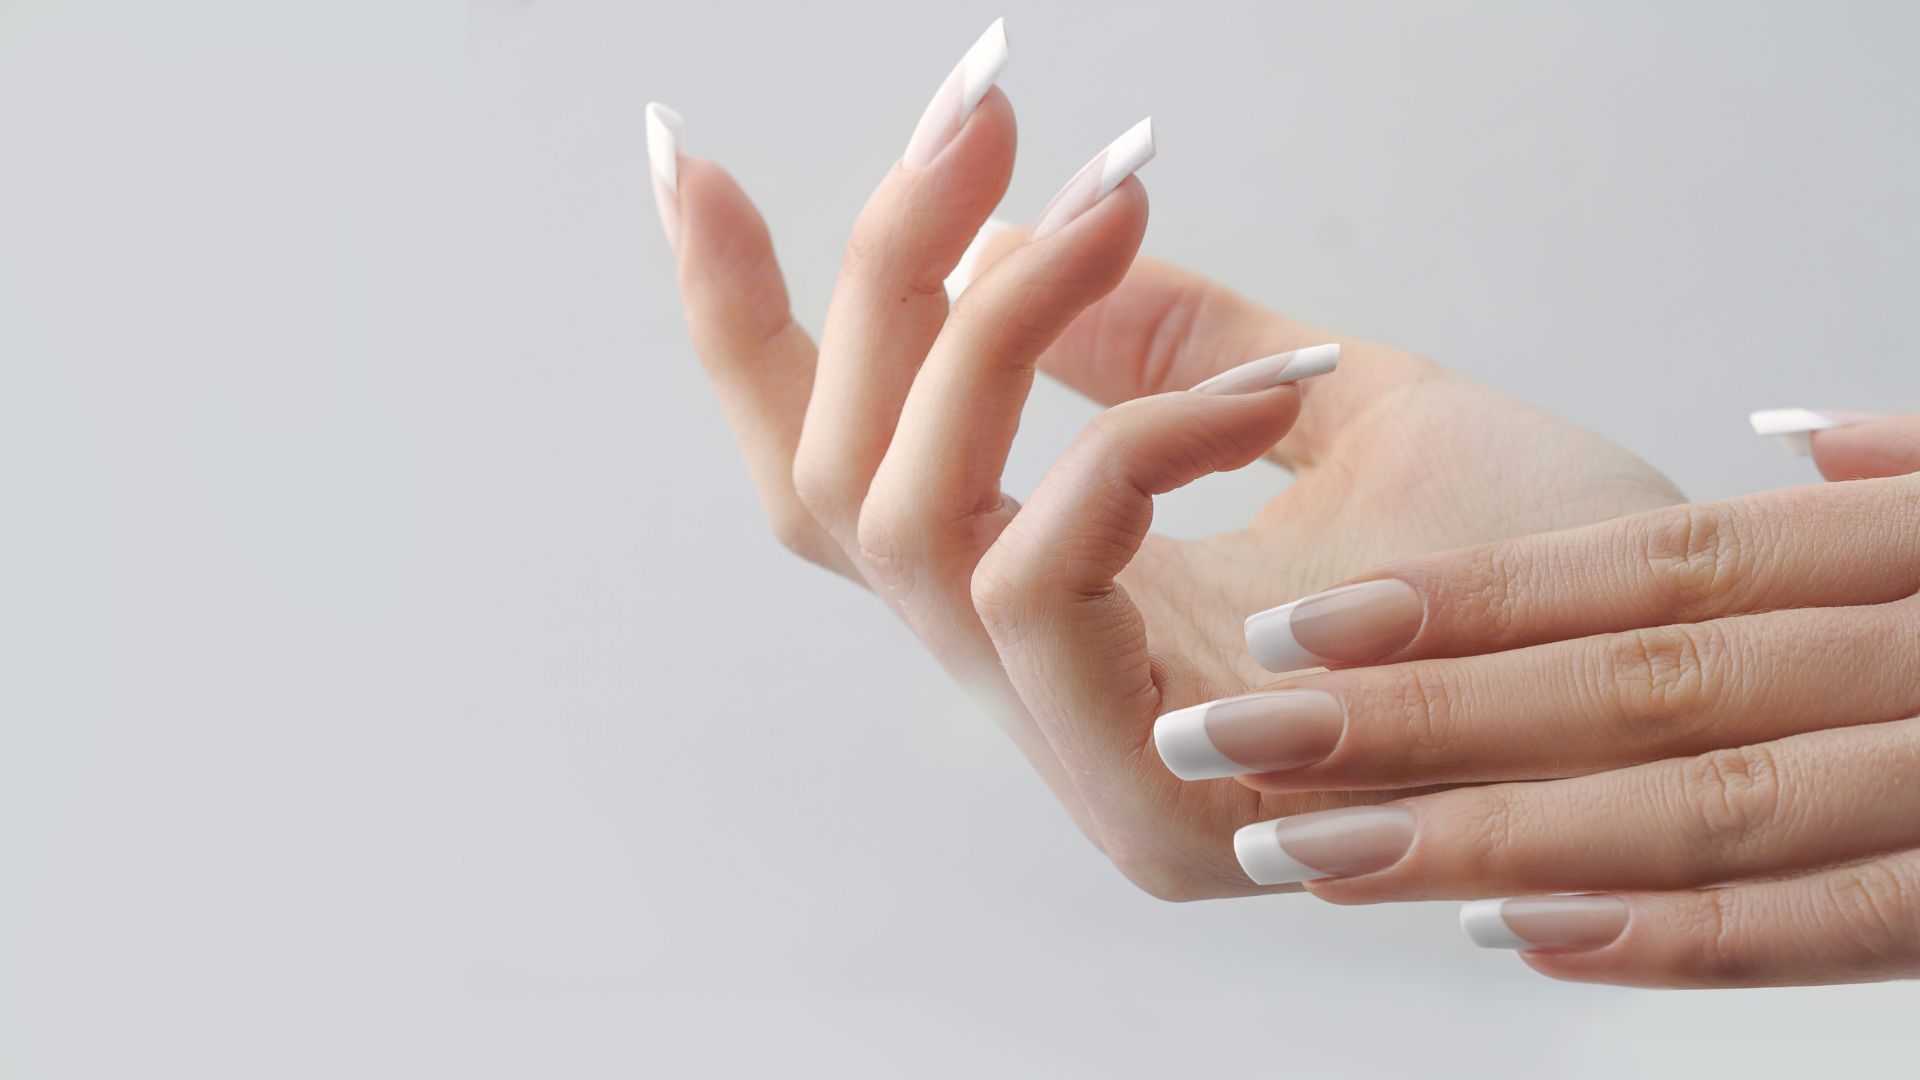 A close up of woman's hand with long nails - Hand Rejuvenation Treatments in Dubai